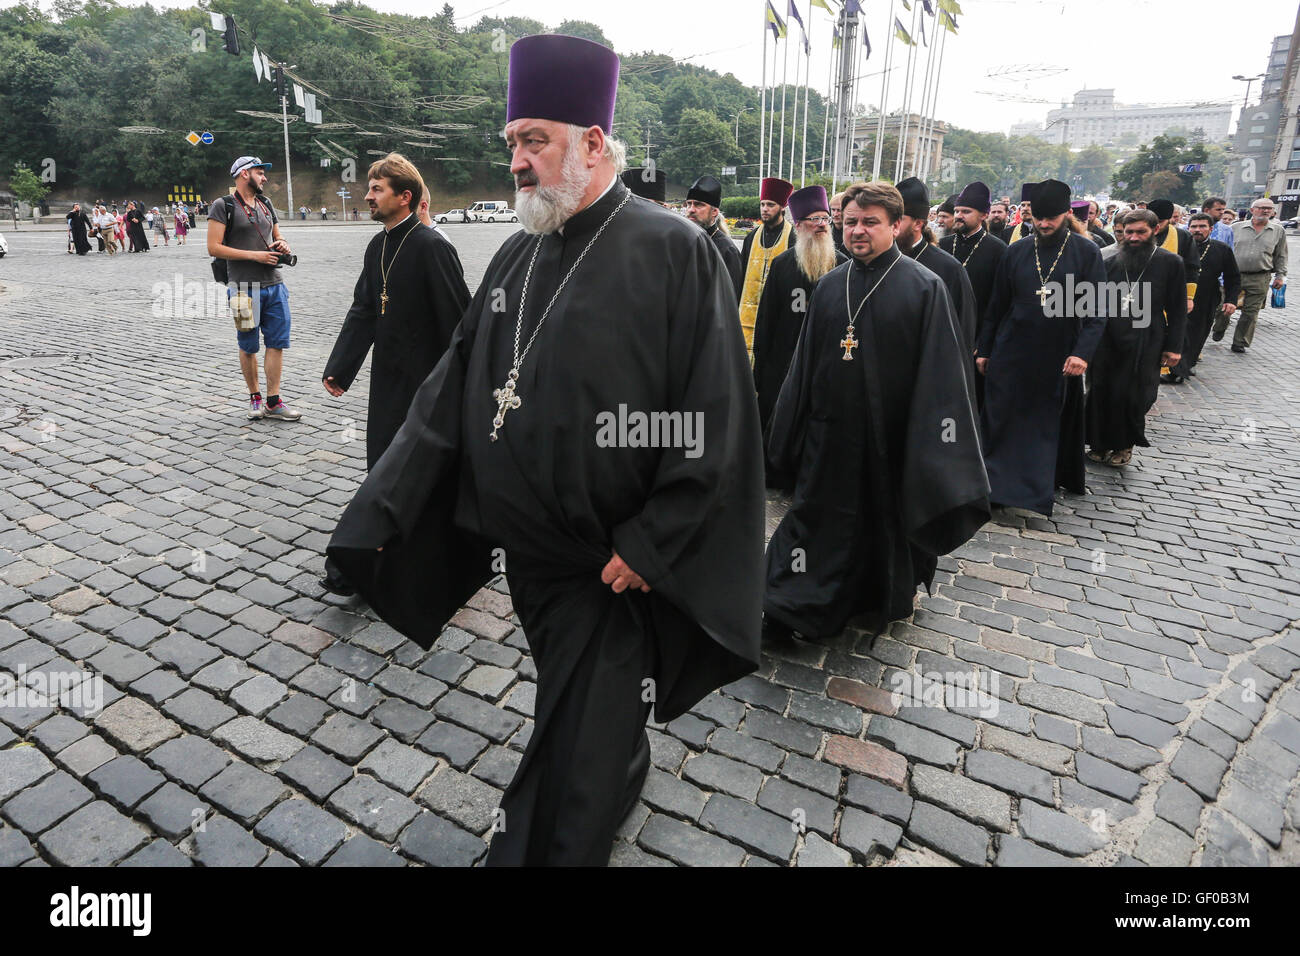 Kyiv, Ukraine. 27th July, 2016. Ukrainian orthodox believers, priests, monks attend a religion march organized by the Ukrainian Orthodox Church of the Moscow Patriarchate. Believers who have begun a course from Svyatogorsk Monastery in eastern Ukraine and from Pochayiv Monastery at the west of the country, met at the European Square in Kyiv. The main celebrations took place at Vladimir's Hill in the center of Kyiv. Credit:  Oleksandr Khomenko/Pacific Press/Alamy Live News Stock Photo